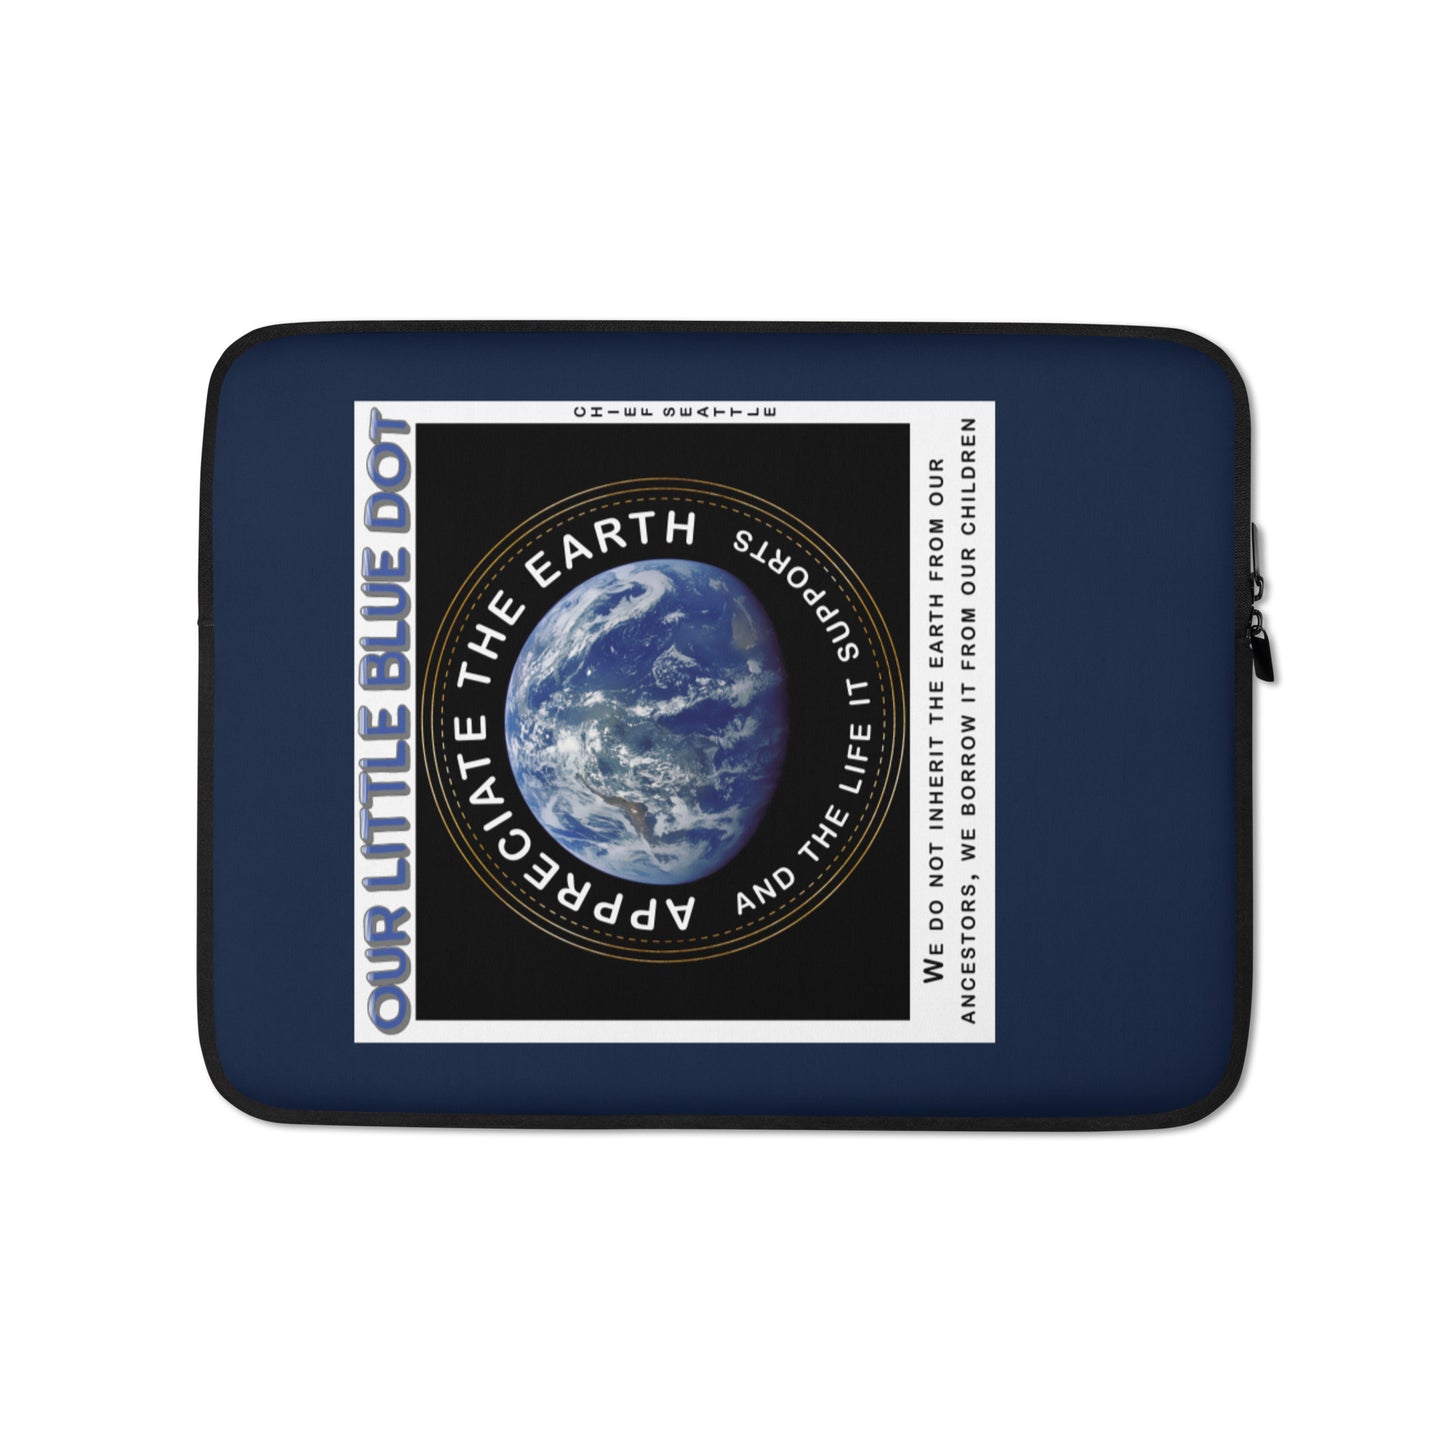 Laptop Sleeve - Appreciate The Earth, Chief Seattle